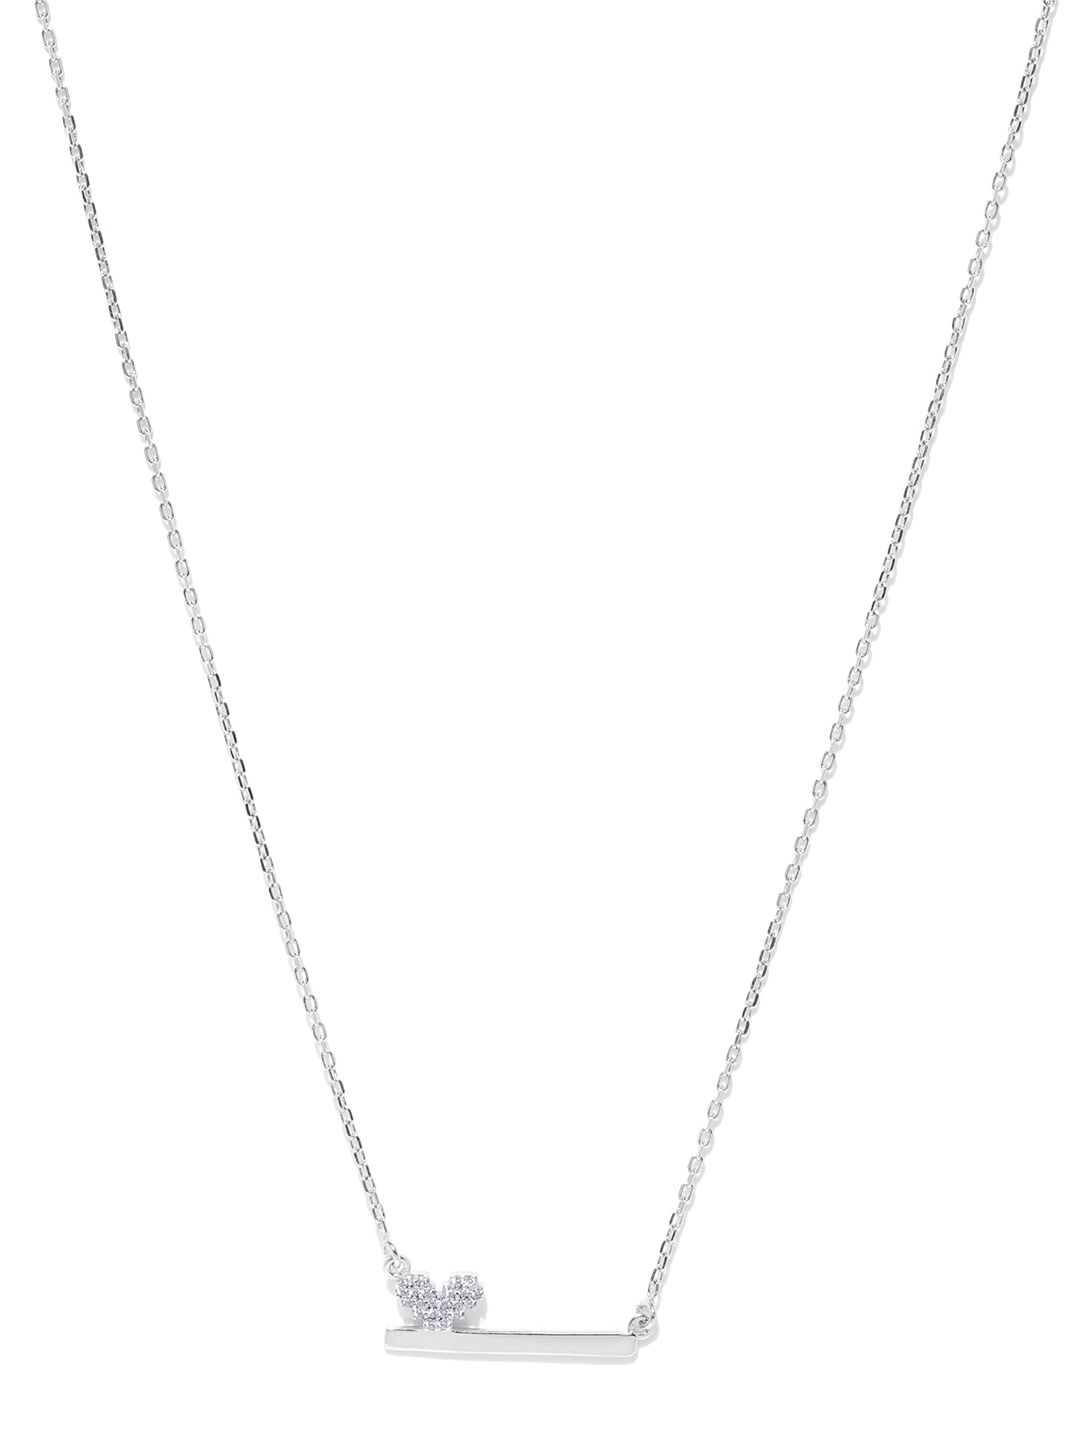 Carlton London Silver-Toned Rhodium-Plated CZ-Studded Necklace Price in India